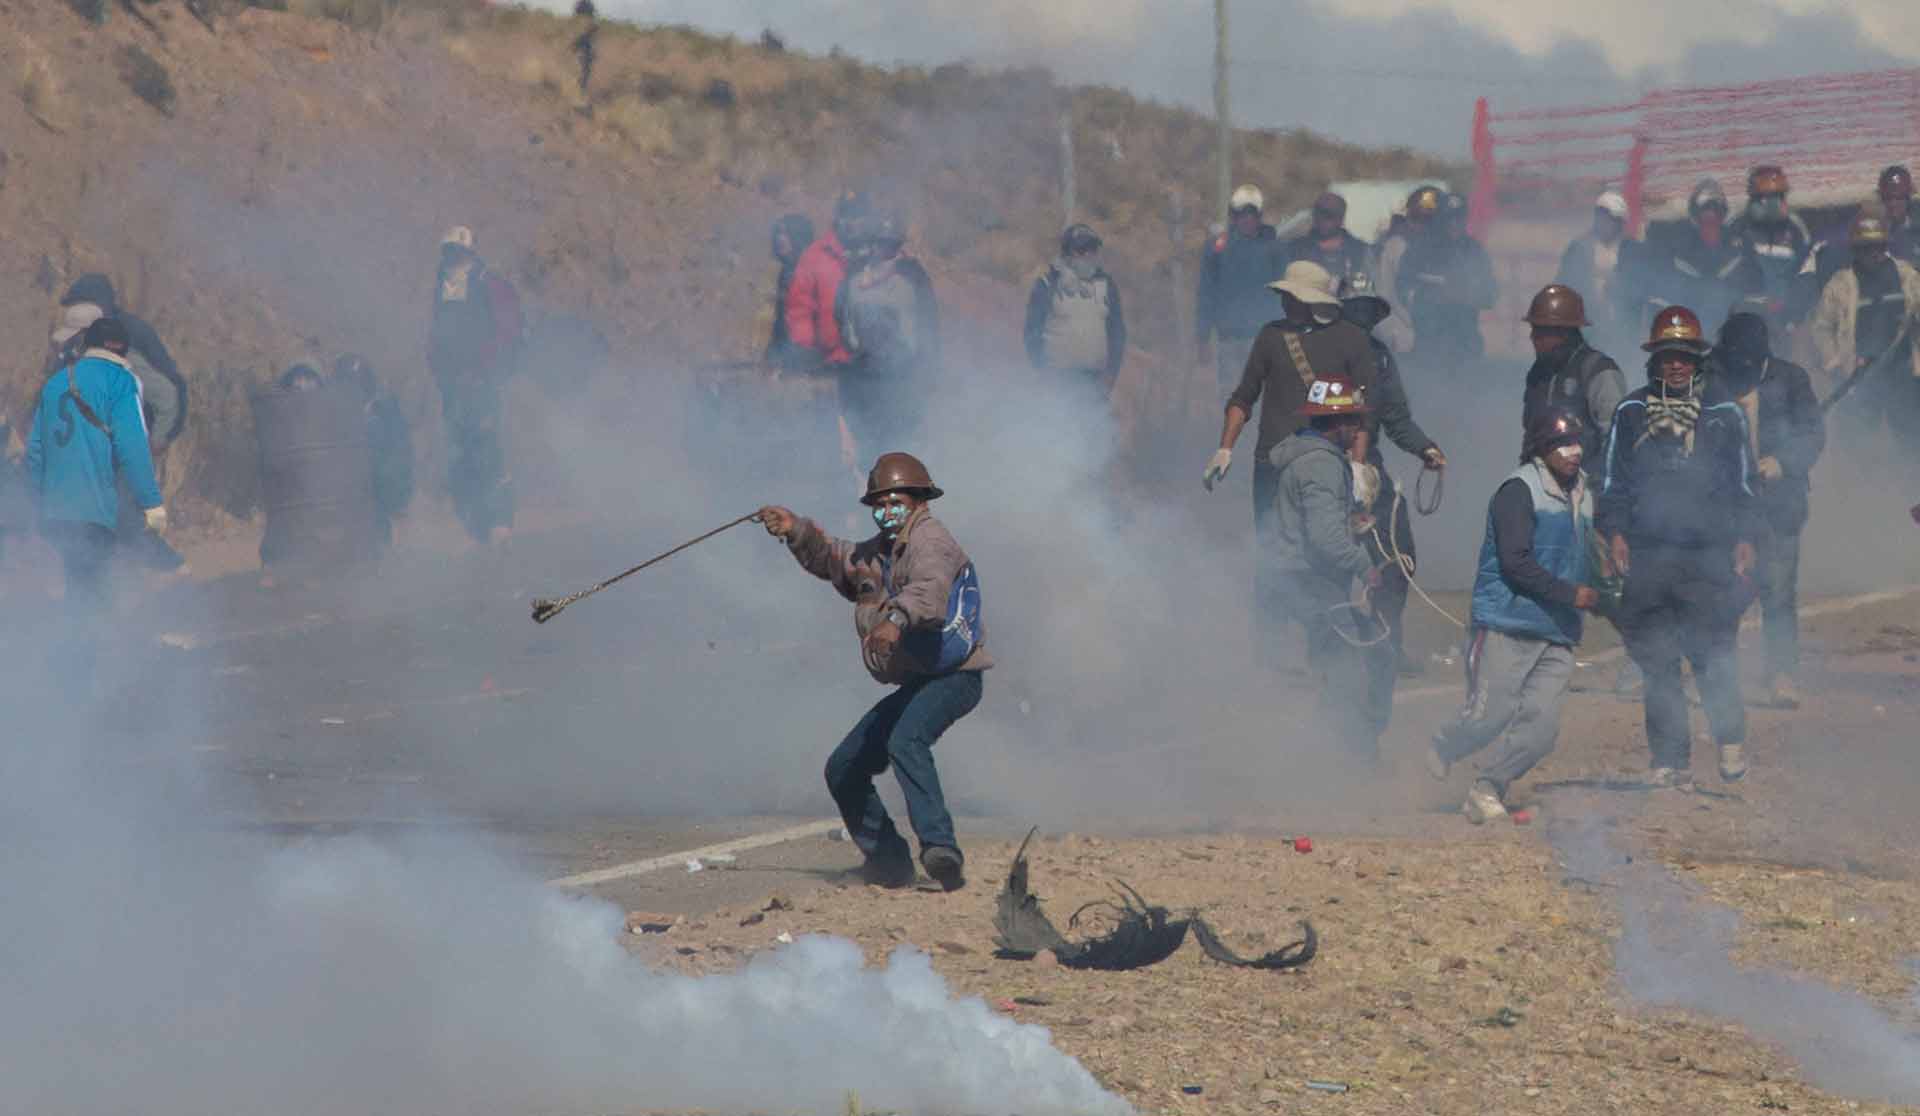 Independent miners clash with the police as they run from clouds of tear gas during protests in Panduro, Bolivia, Thursday, Aug. 25, 2016. Thousands of independent miners continued their protests with roadblocks which precipitated the clashes as the police attempted to dislodge them. (AP Photo/Juan Karita)